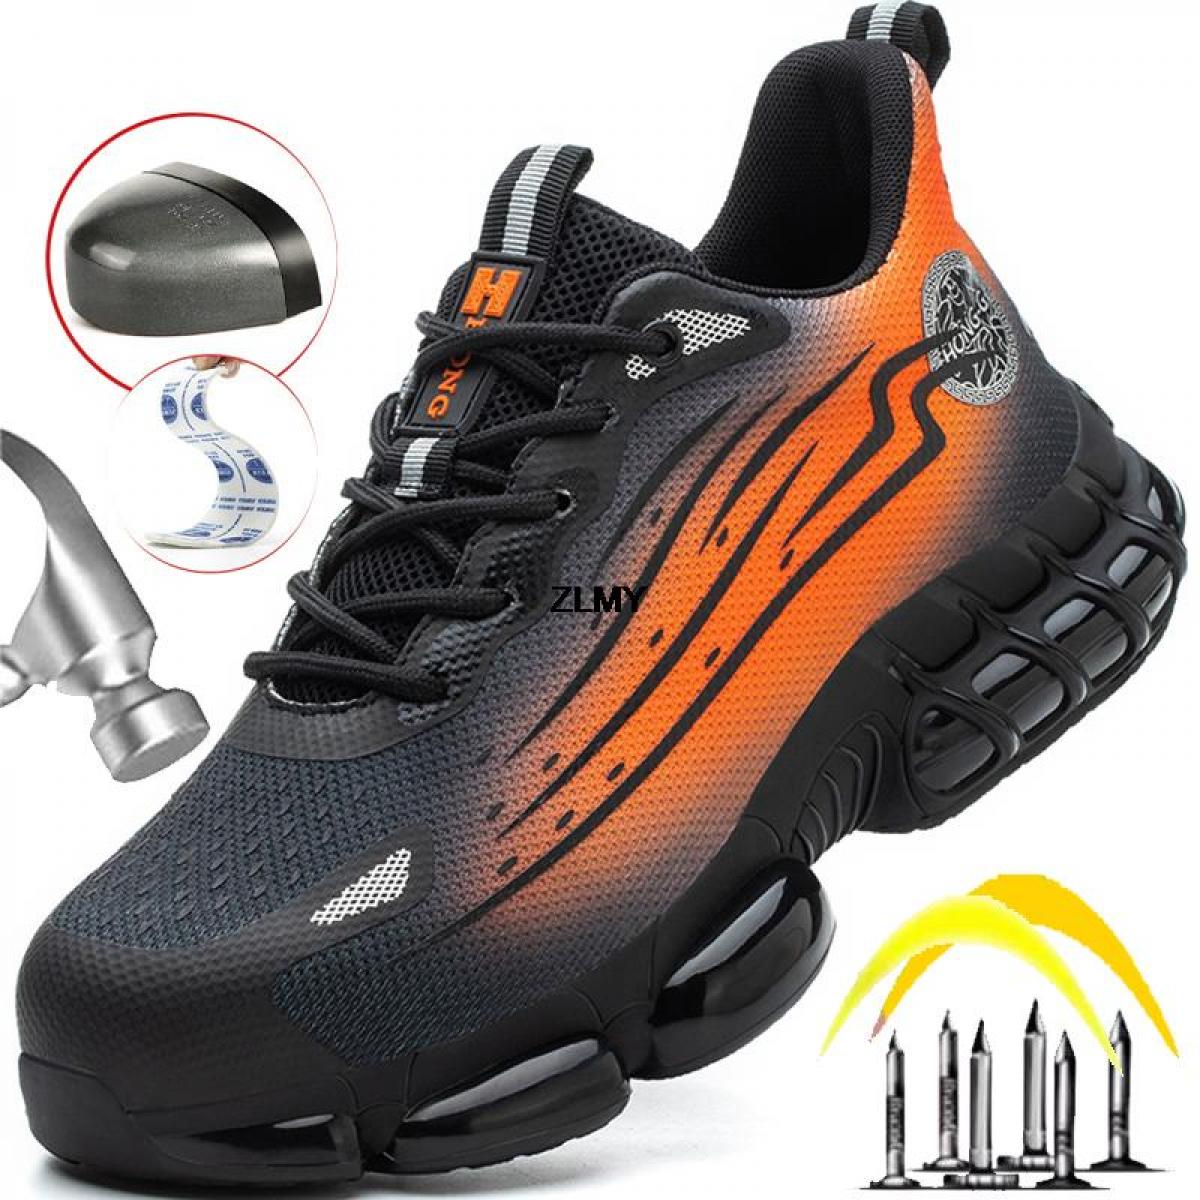 Fashion Steel Toe Sneaker Men Safety Shoes Air Cushion Work Safety Boots Antismash Puncture Proof Man's Work Shoes Sport